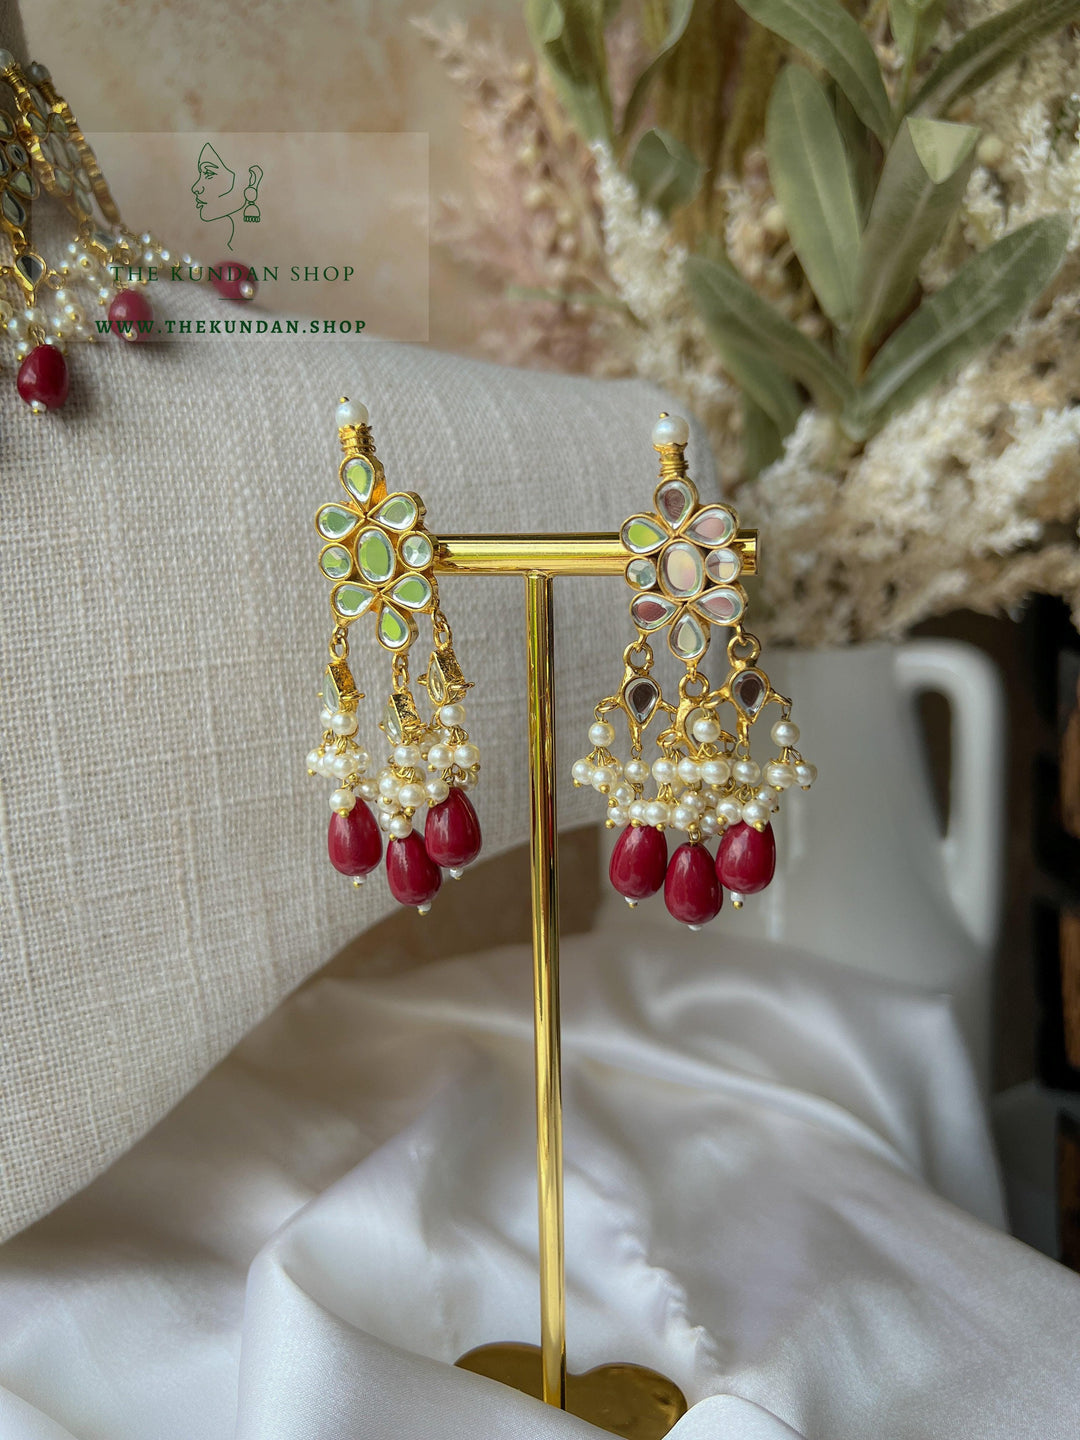 Flower Mirrors in Ruby Necklace Sets THE KUNDAN SHOP 